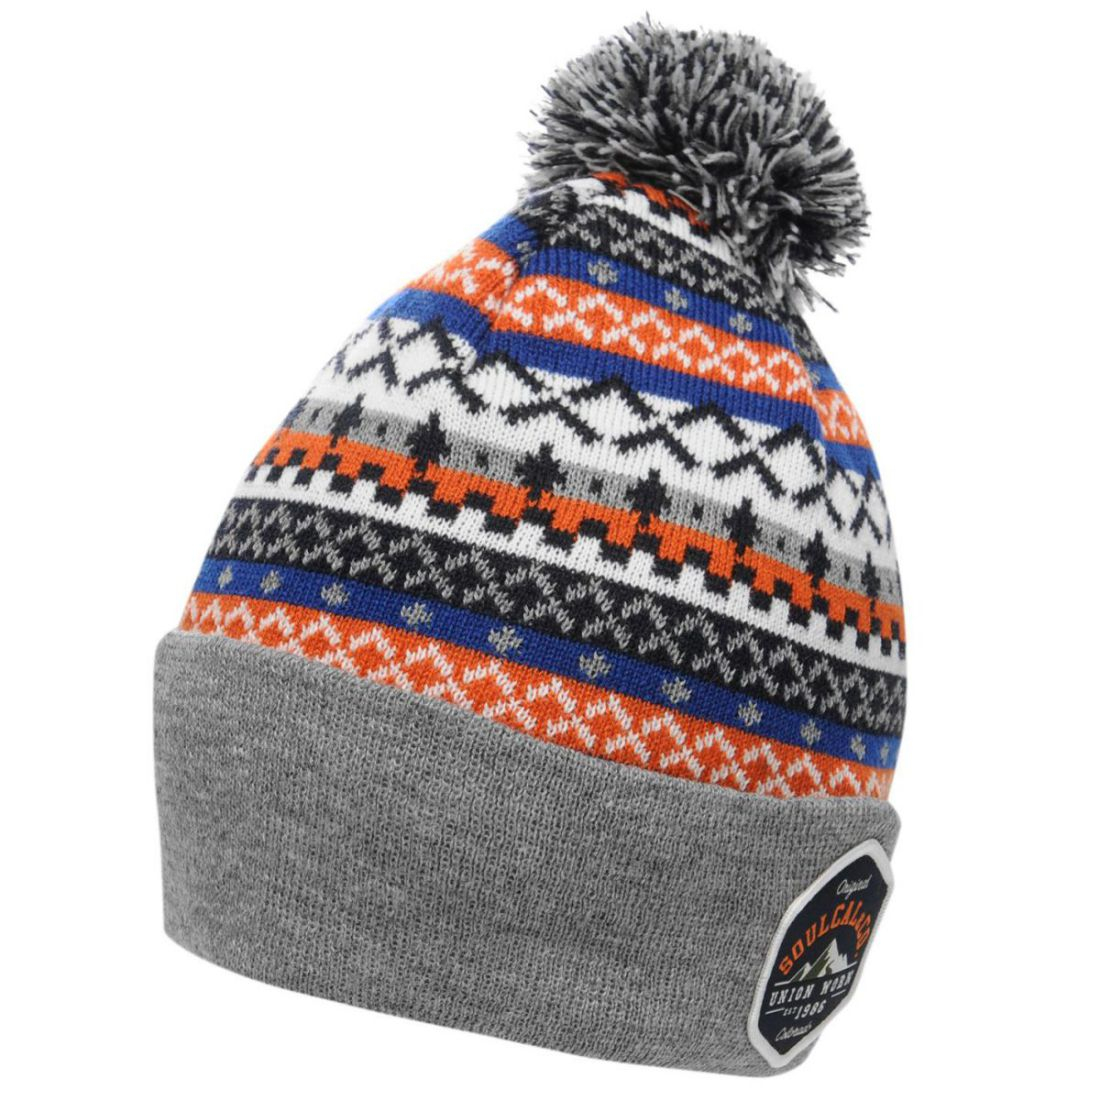 Knitting Pattern Bobble Hat Details About Soulcal Mens Aztec Bobble Hat Beanie Pattern Warm Print Knitted